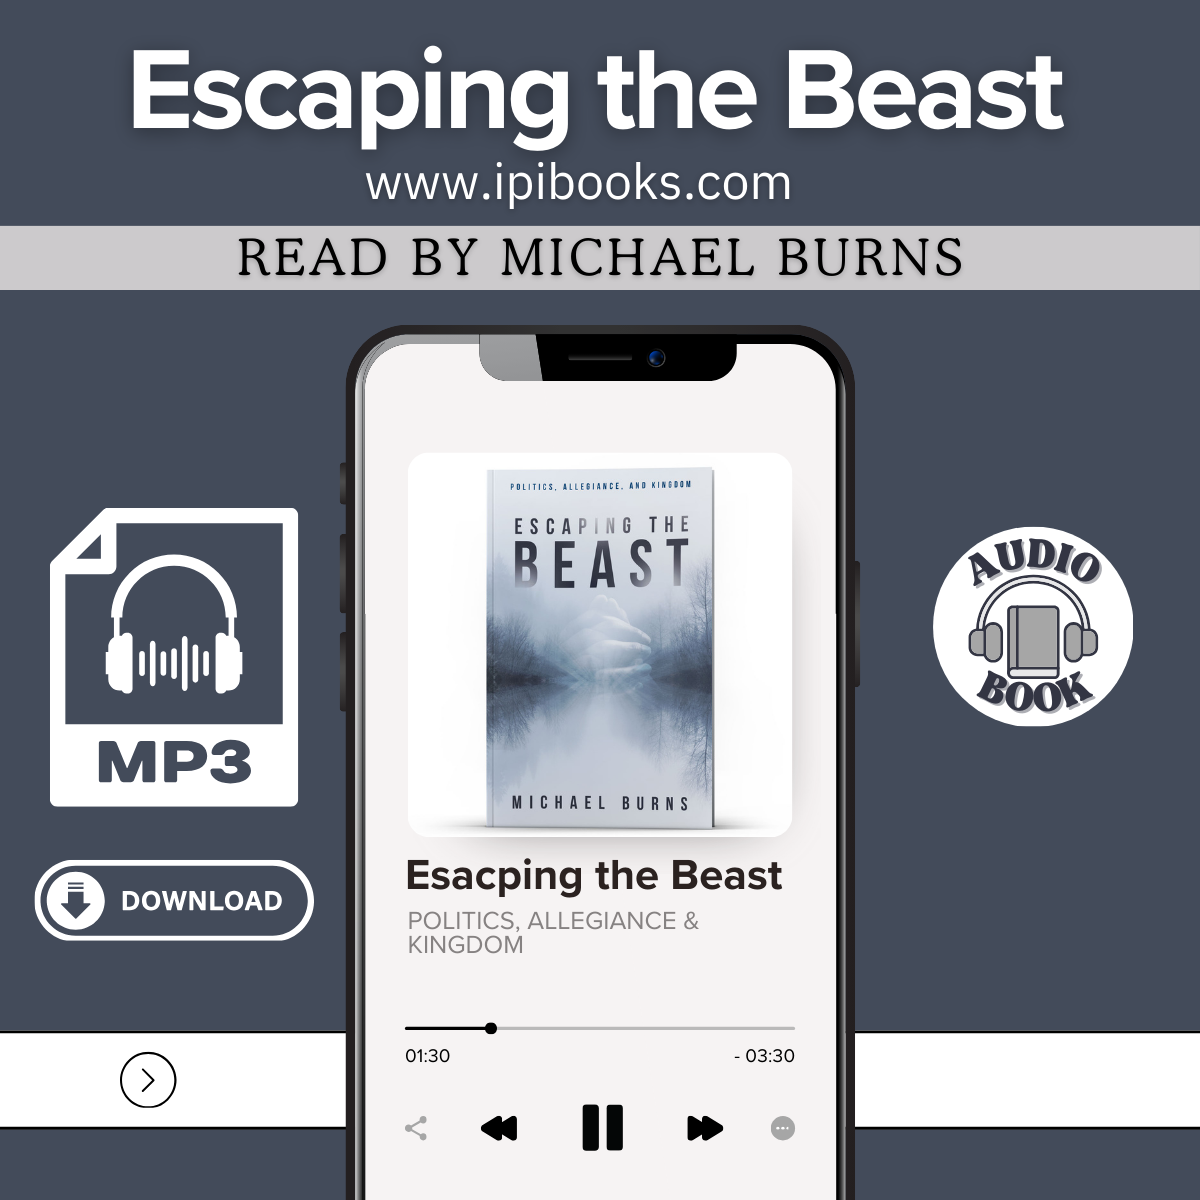 Escaping the Beast—Politics, Allegiance, and Kingdom (Audio Book)